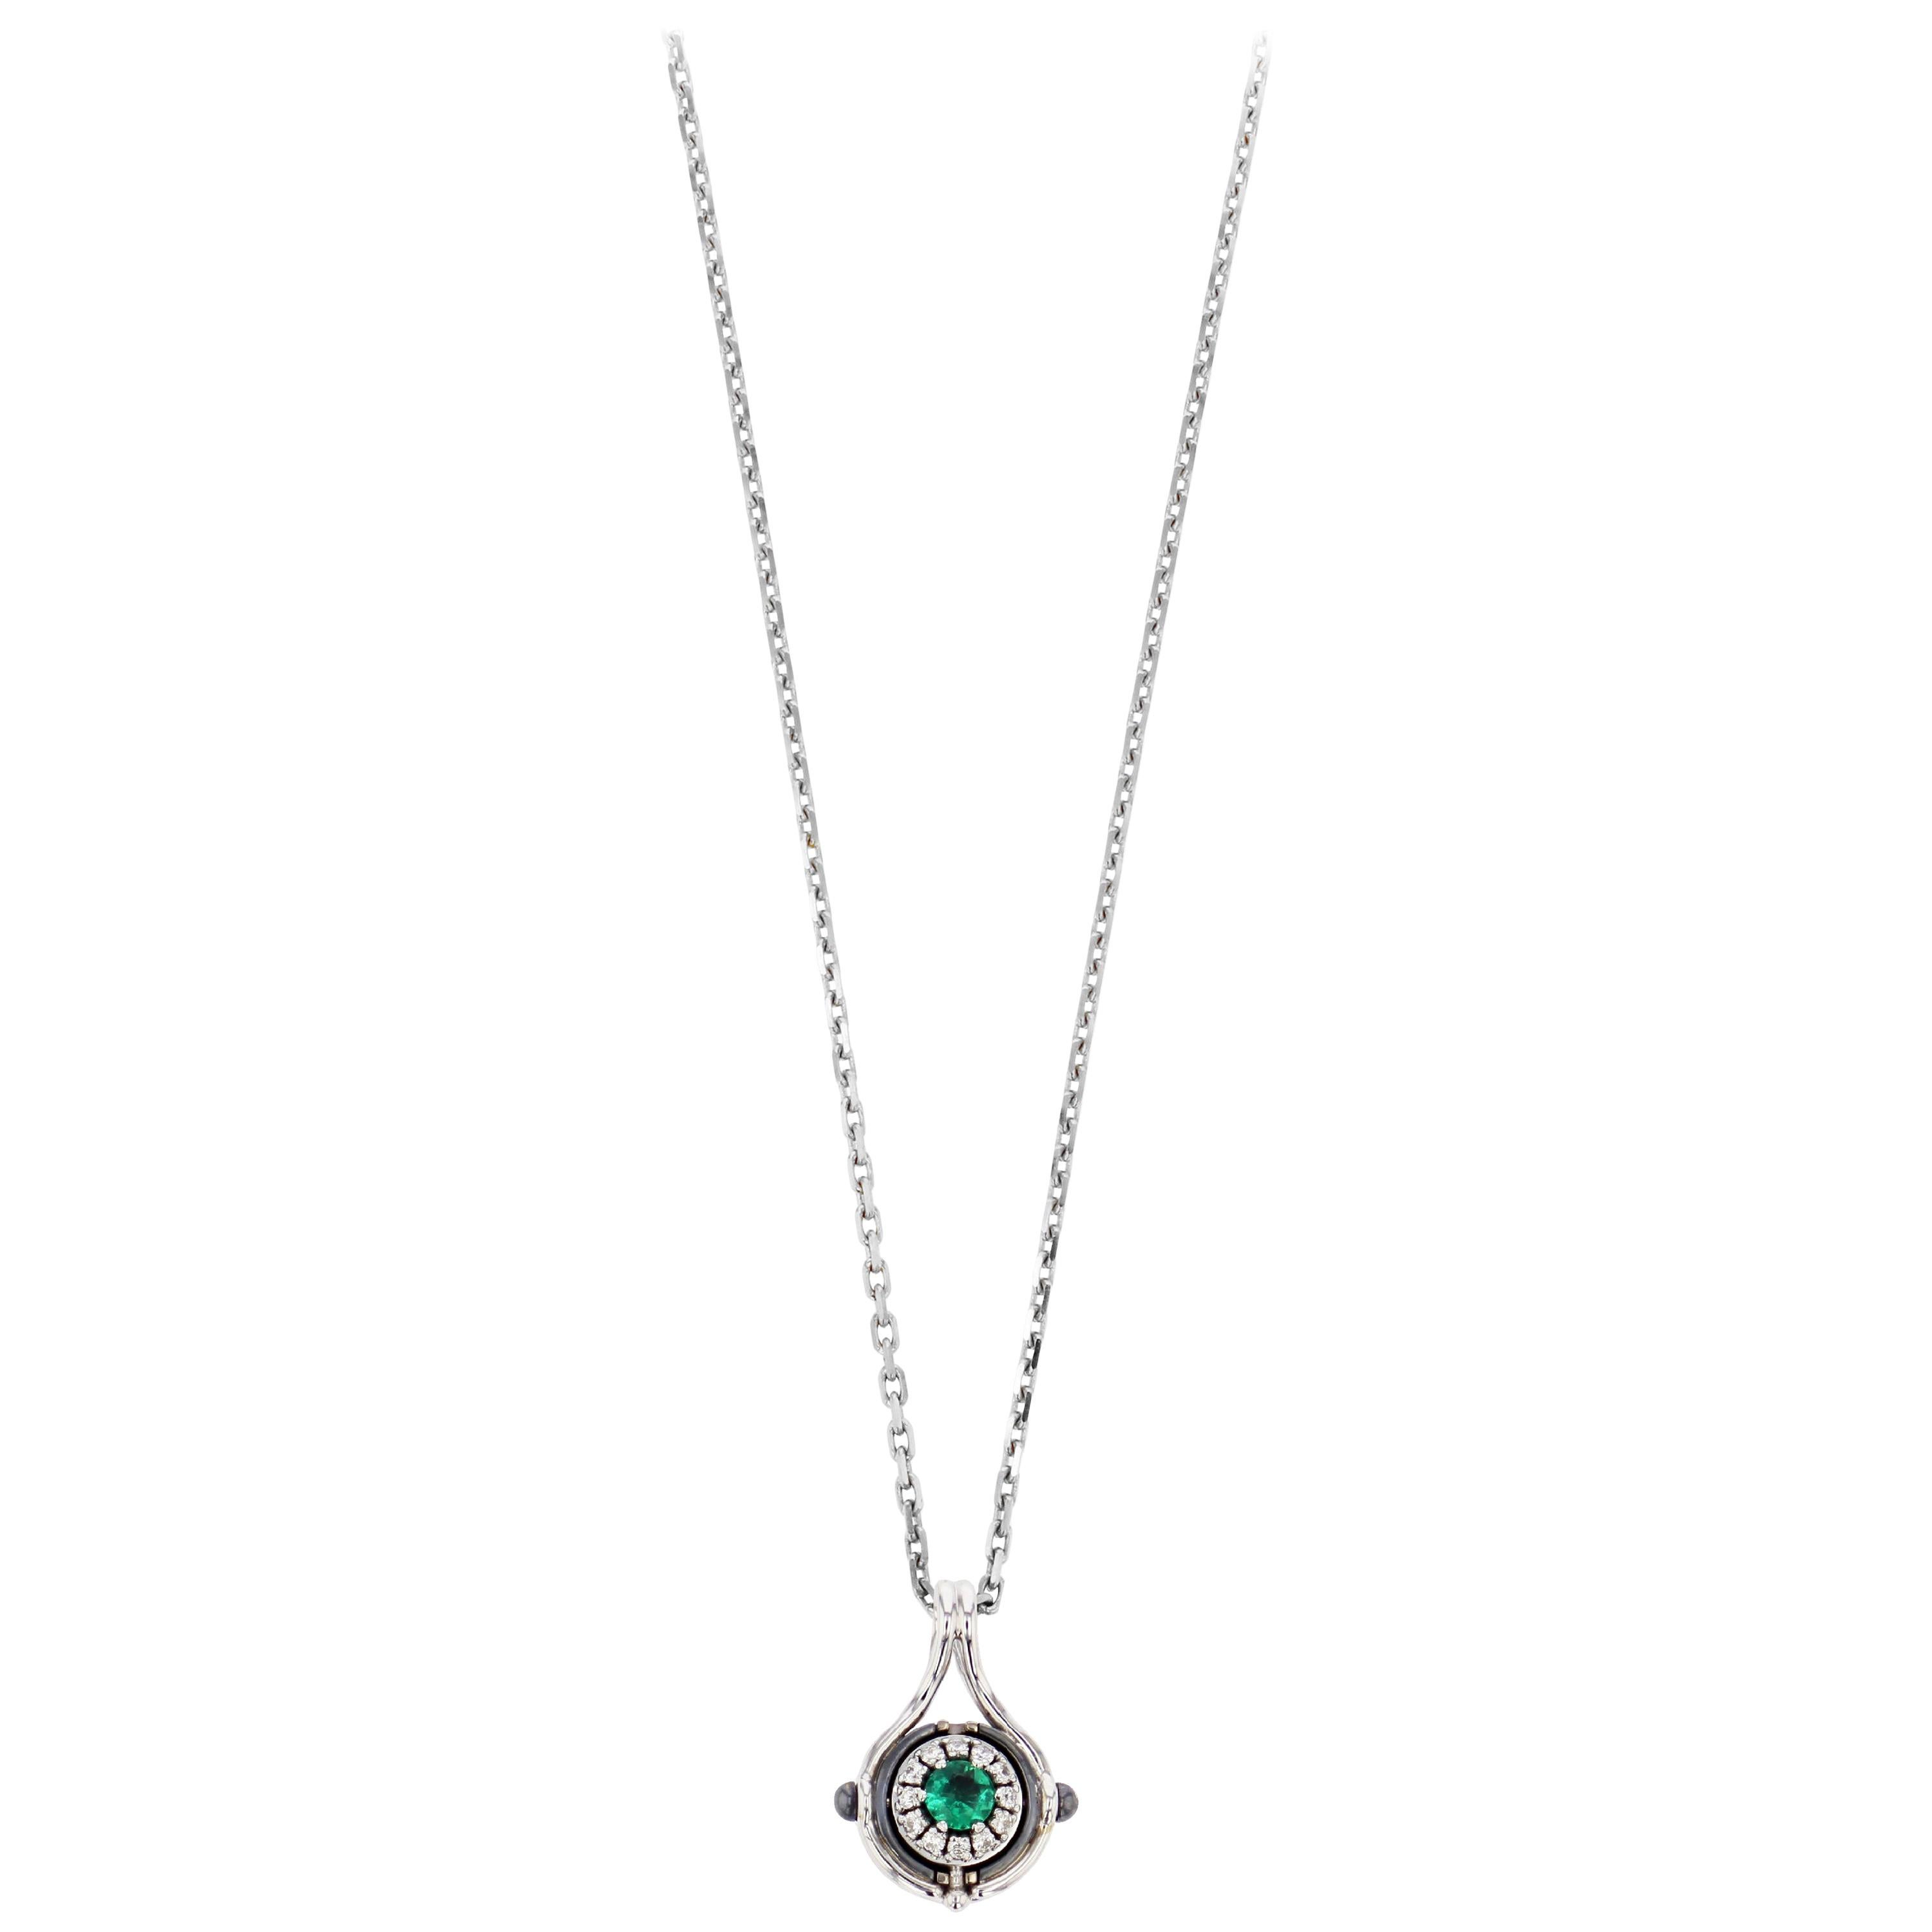 Emerald Diamonds Mira Pendant Necklace in 18k White Gold by Elie Top